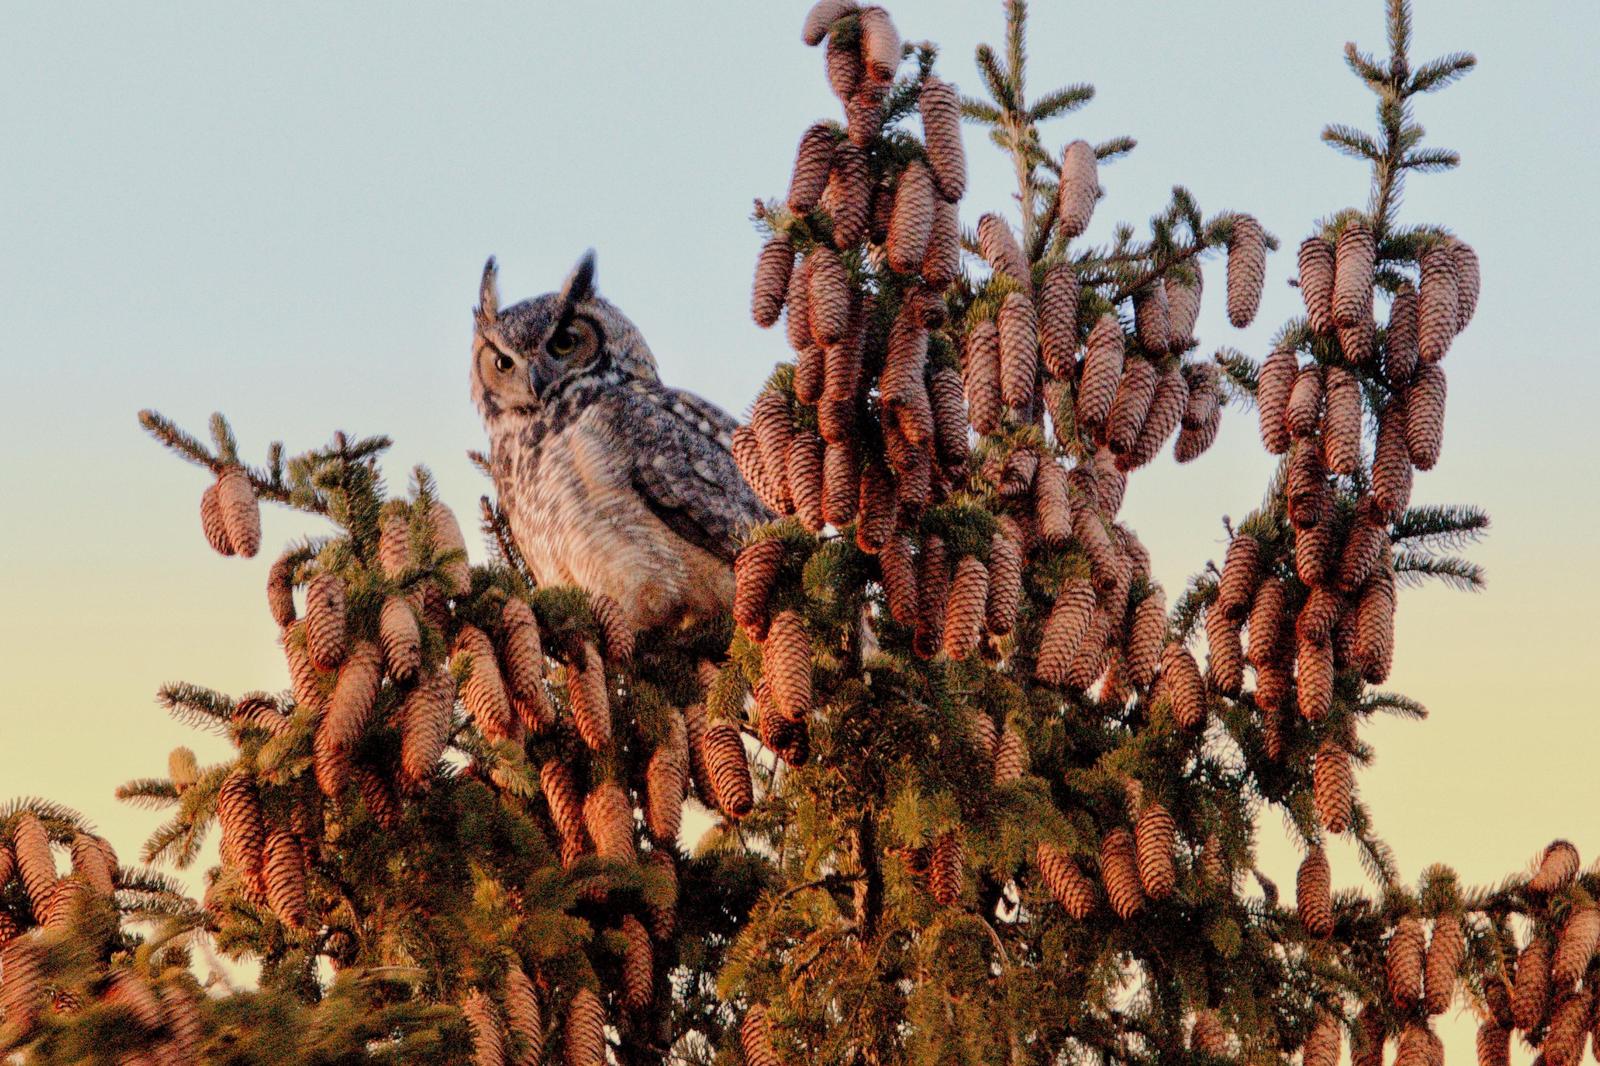 Great Horned Owl Photo by Linda Cote